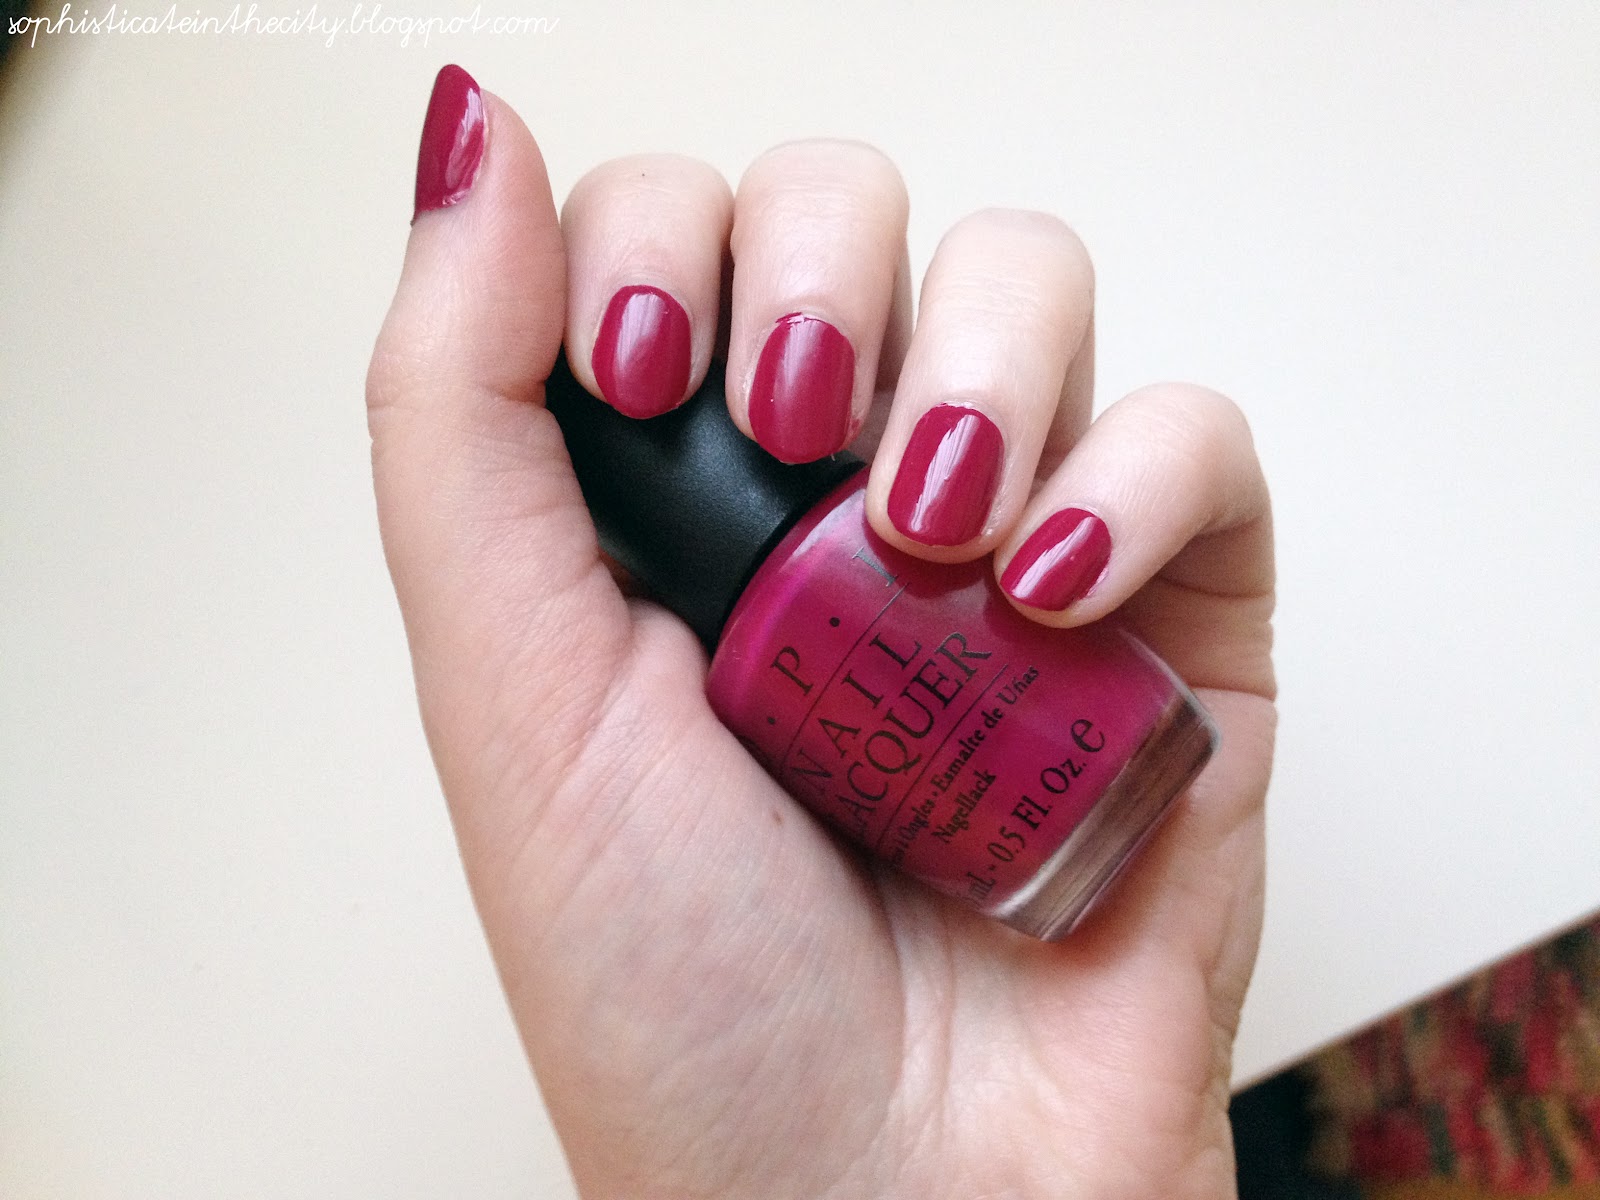 6. OPI "Miami Beet" from the South Beach Collection - wide 5